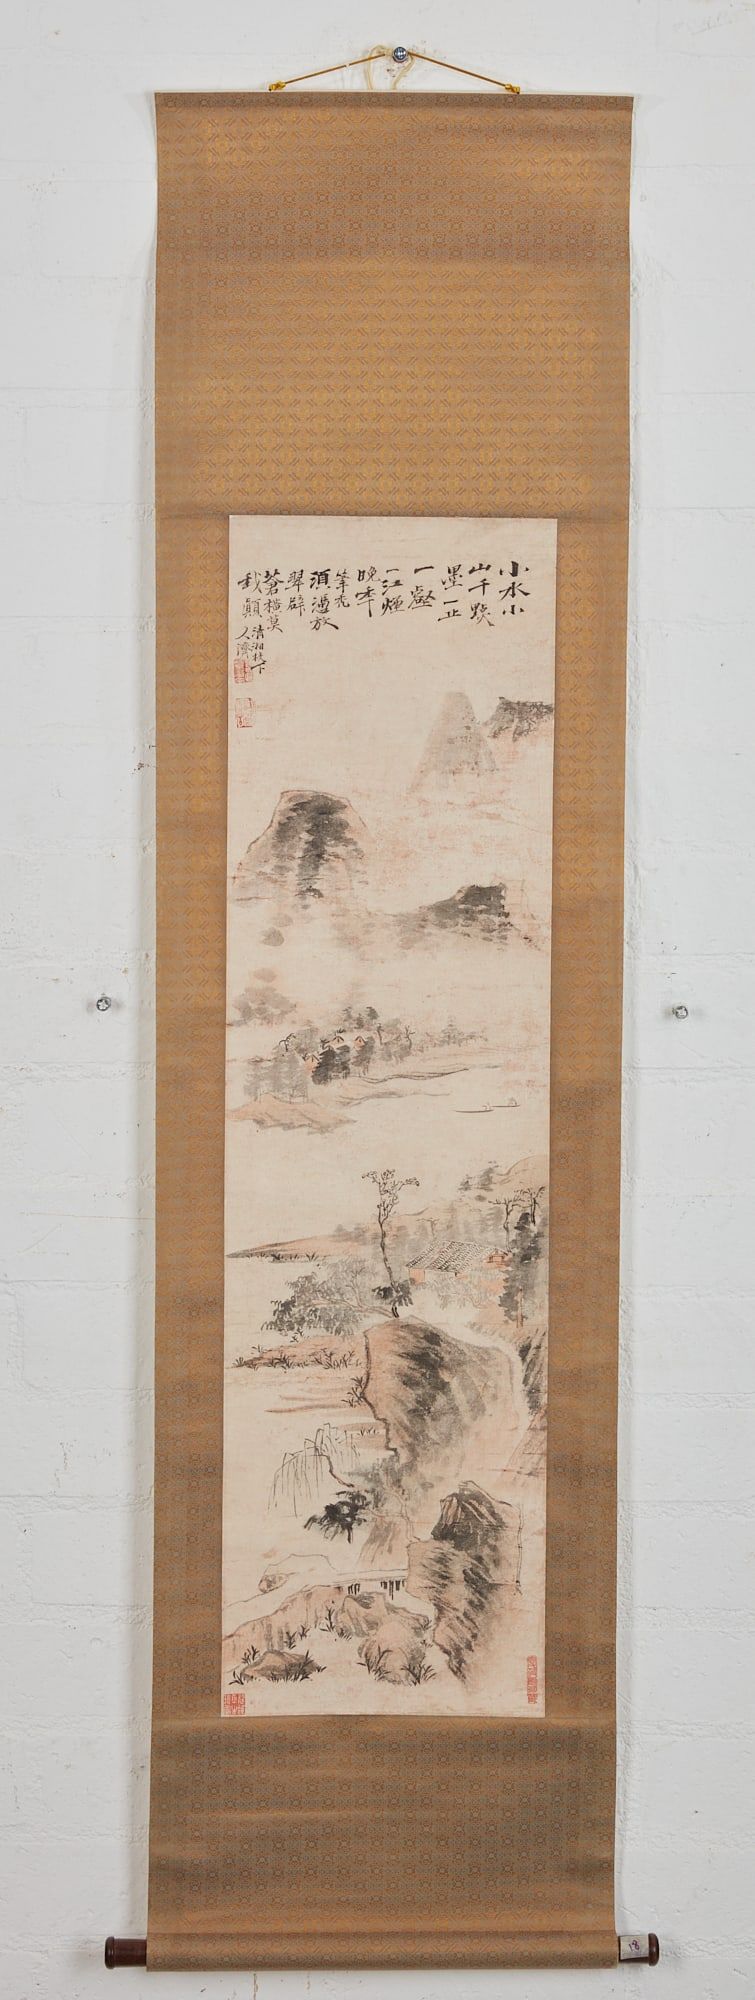 A LANDSCAPE PAINTING HANGING SCROLLA 2fb3e05